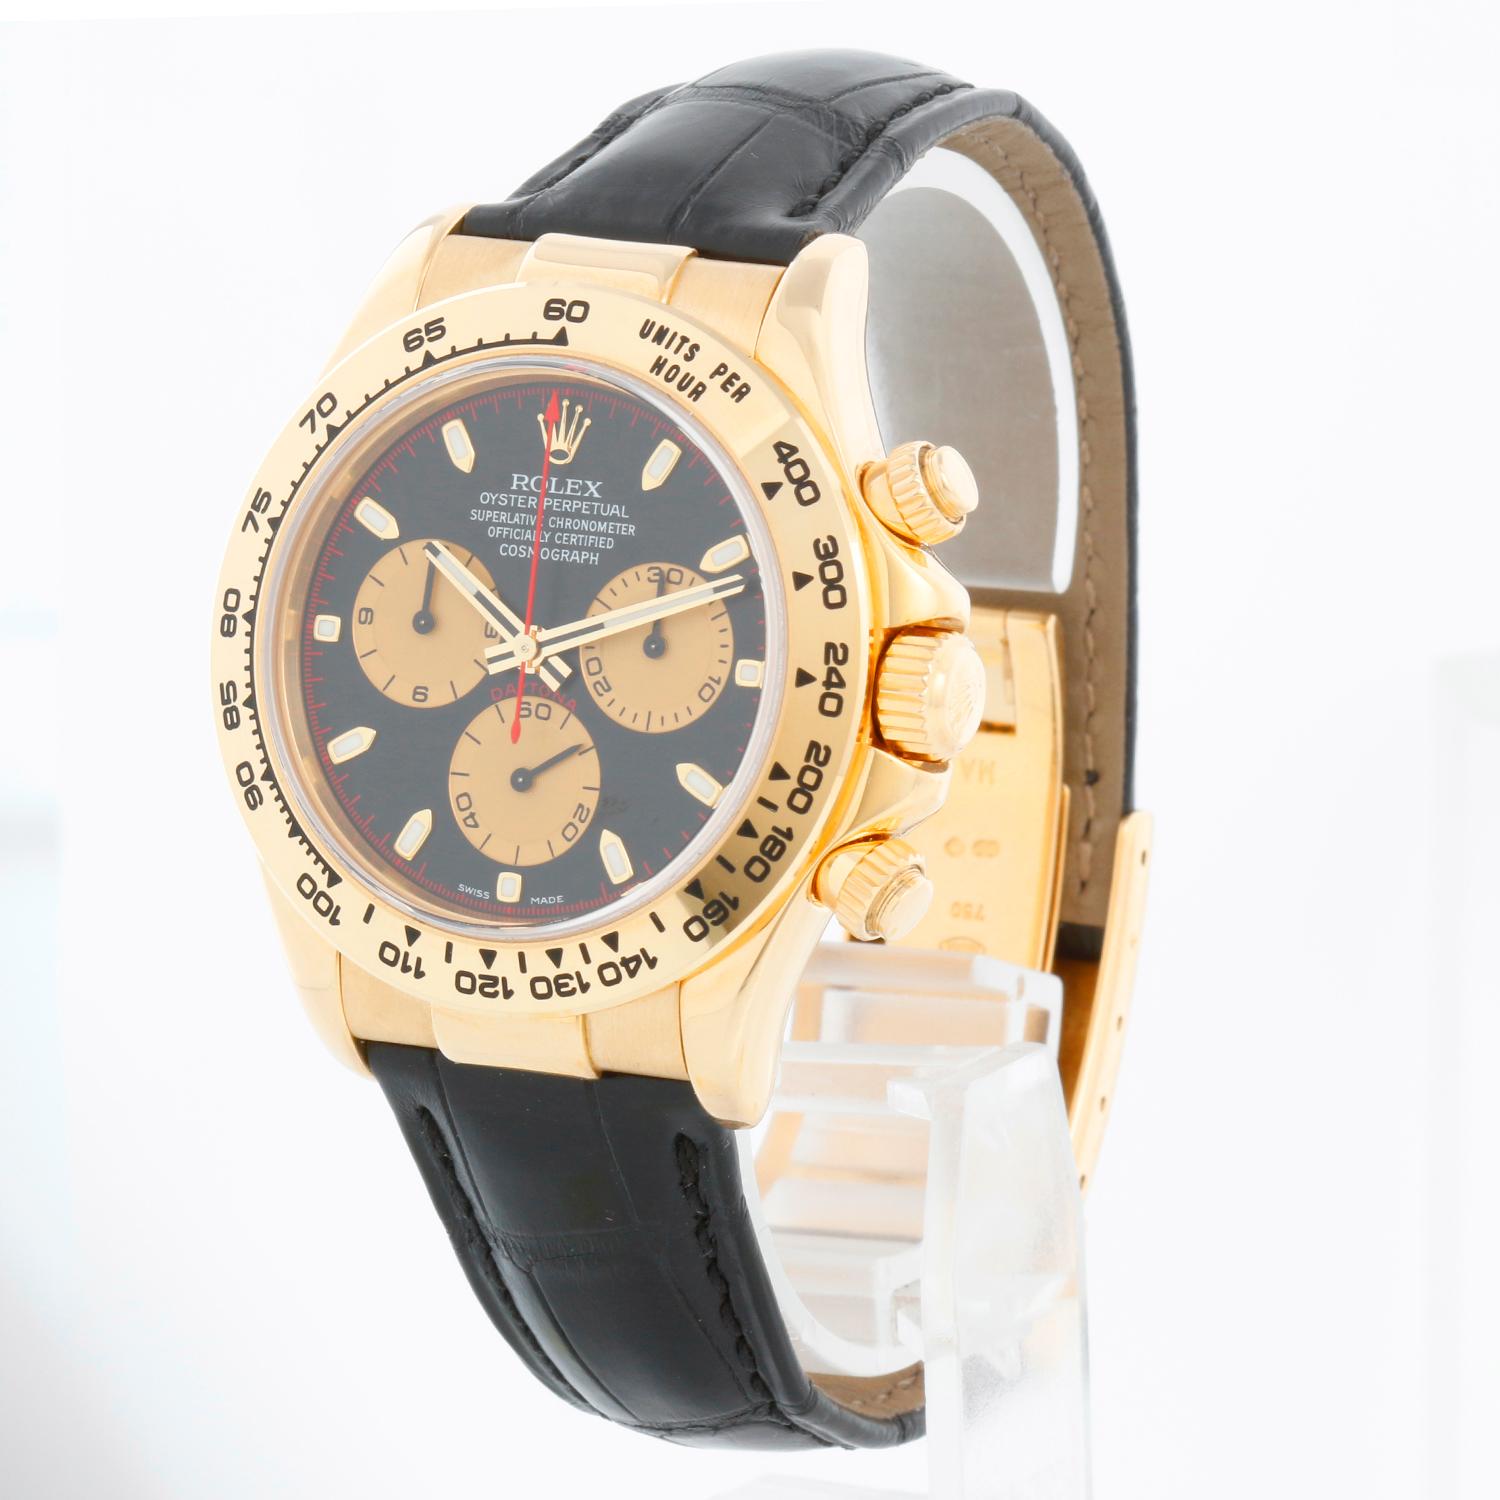 Rolex Cosmograph Daytona with Paul Newman dial Model 116518  - Automatic winding, chronograph, 44 jewels, sapphire crystal. 18k yellow gold case and bezel  (40mm diameter). Black dial with gold sub-dials. Black leather strap with black stitching and